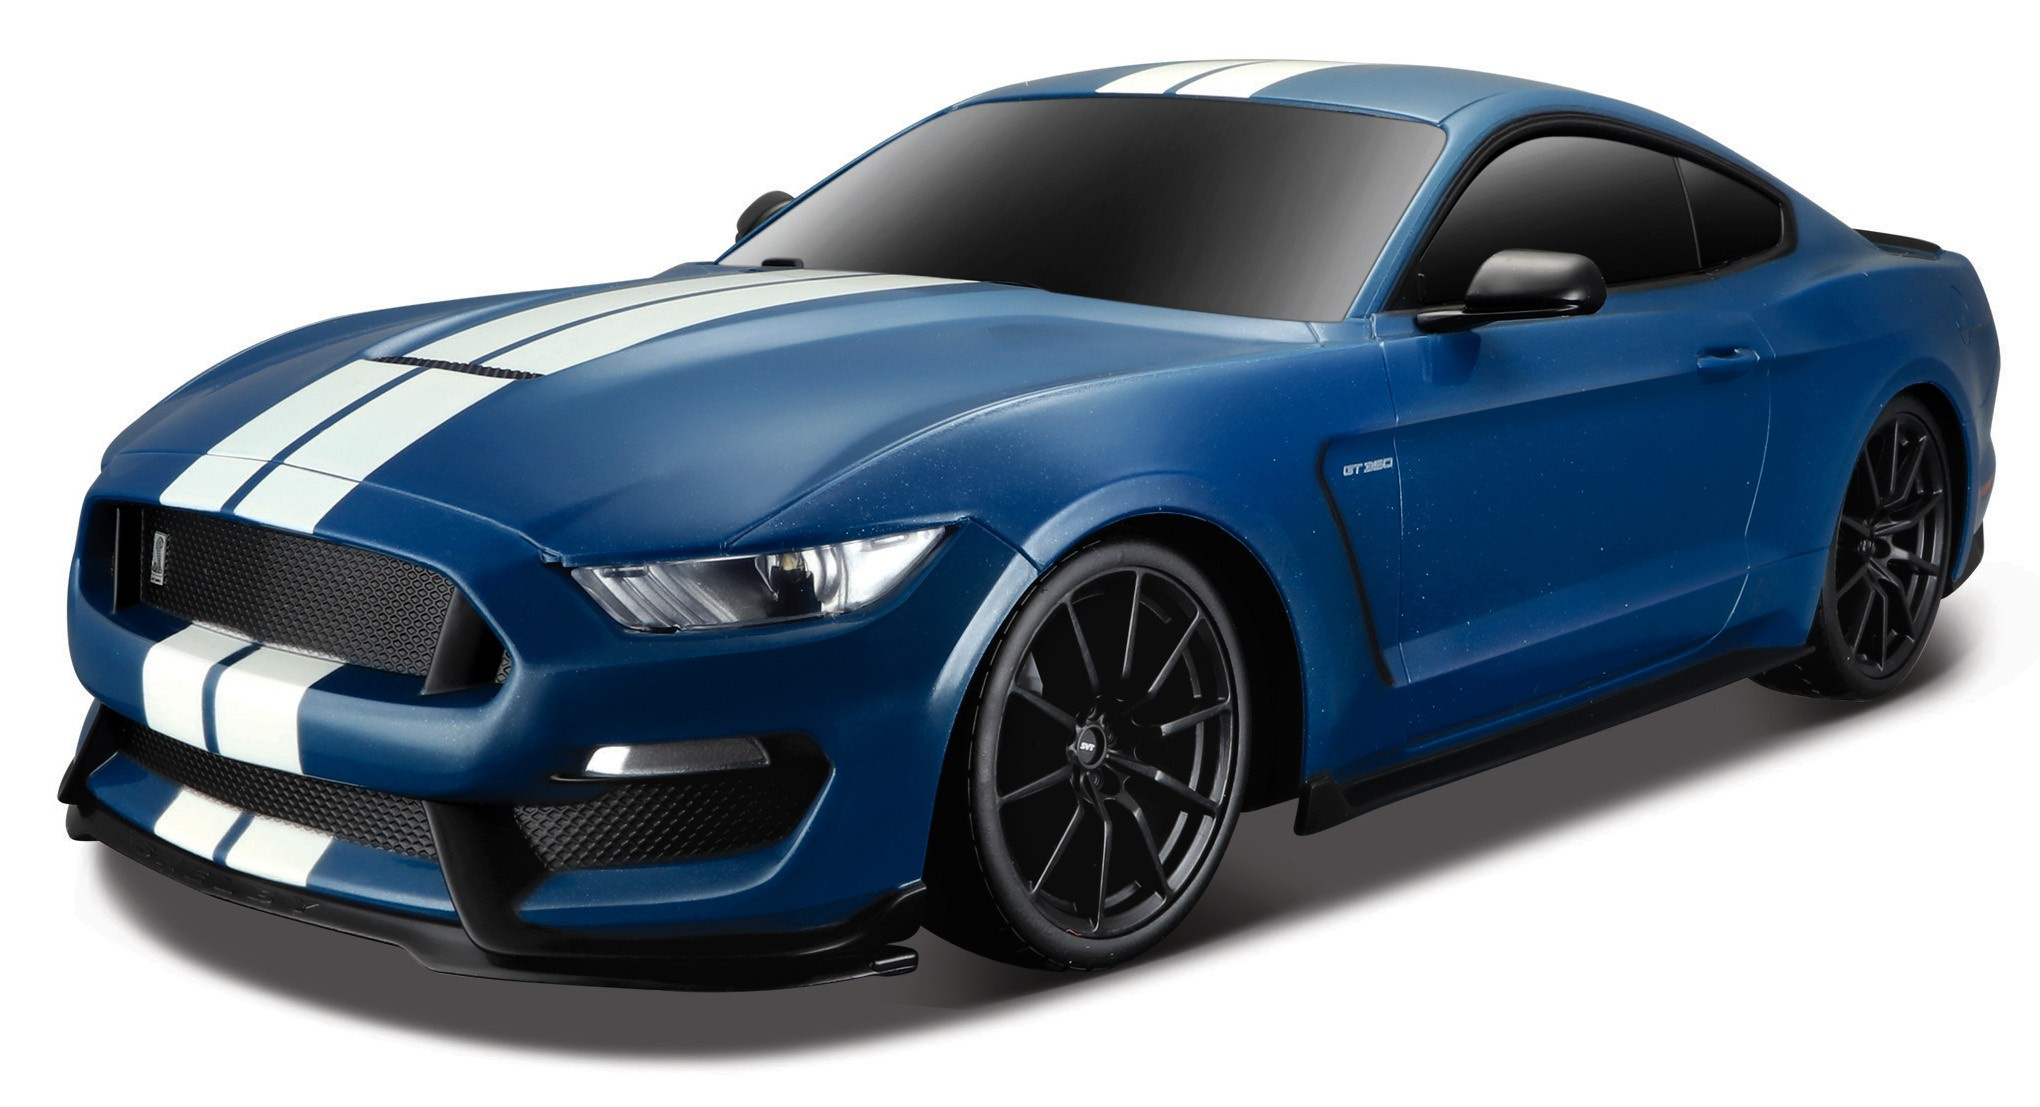 Maisto Racing Car Rc Ford Shelby Gt 30 X 15 Cm 2 4 Ghz Blue Twm Tom Wholesale Management